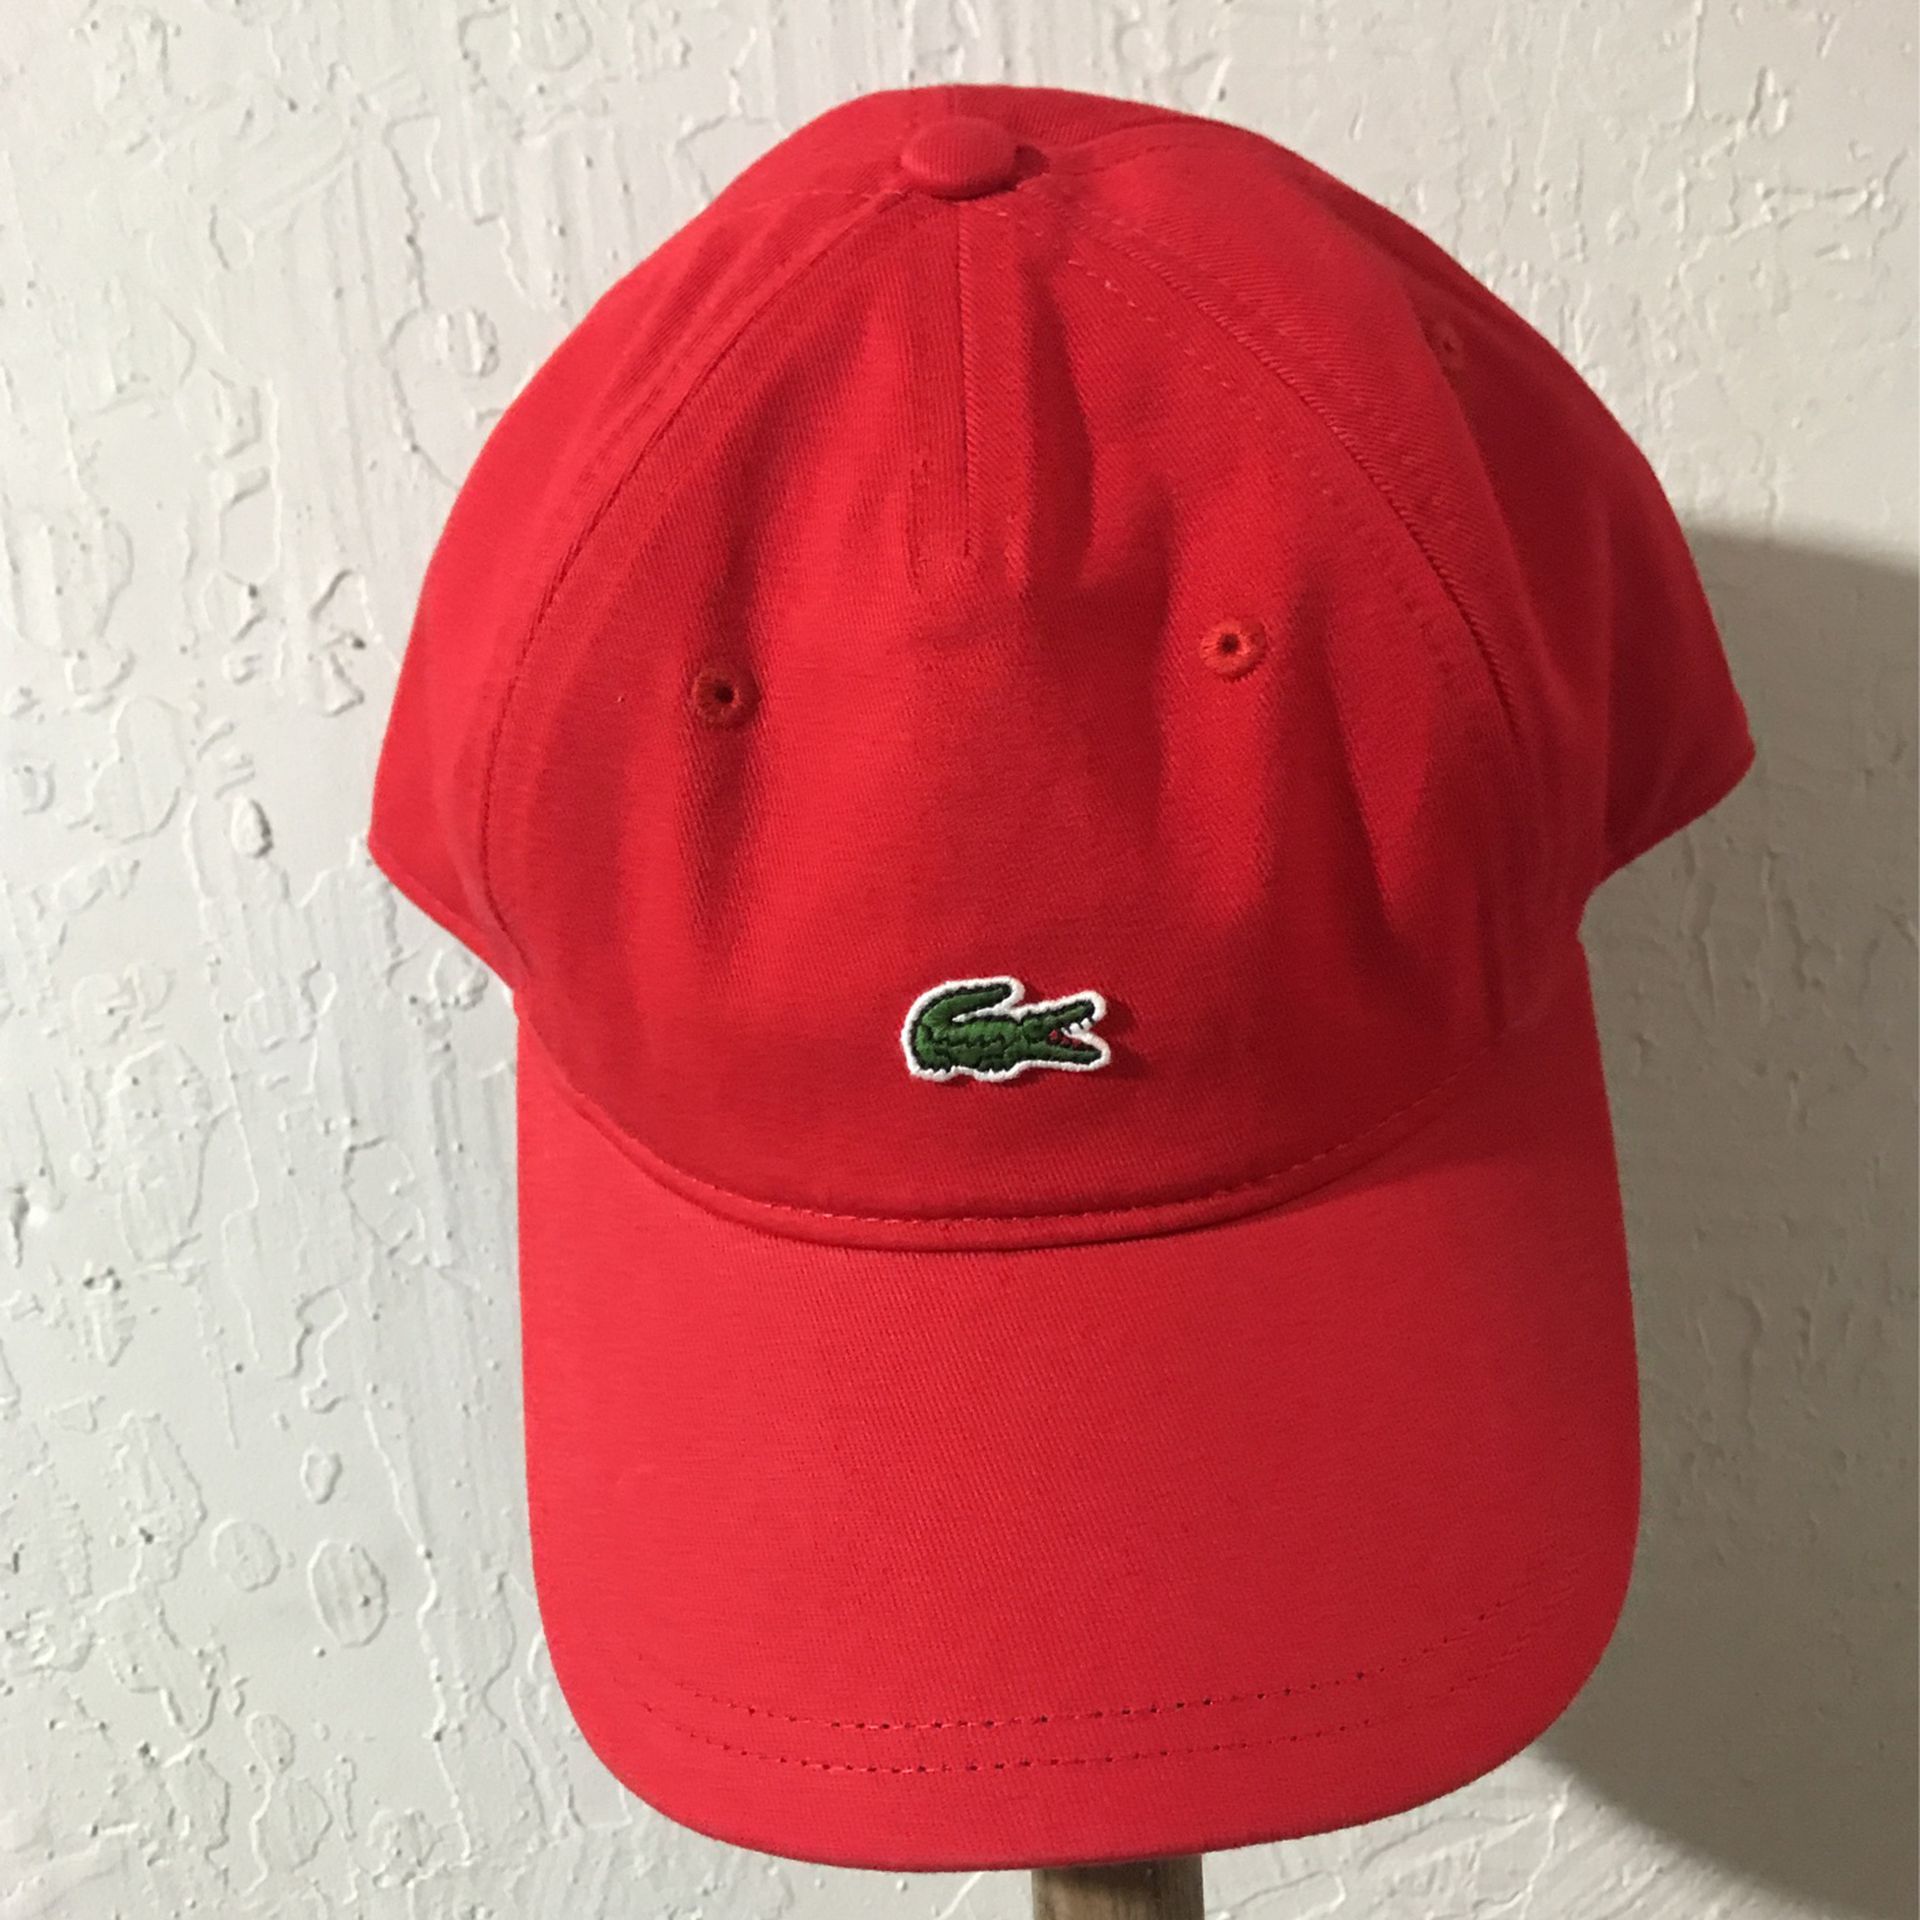 Lacoste Hat-Red for in Gilroy, CA - OfferUp